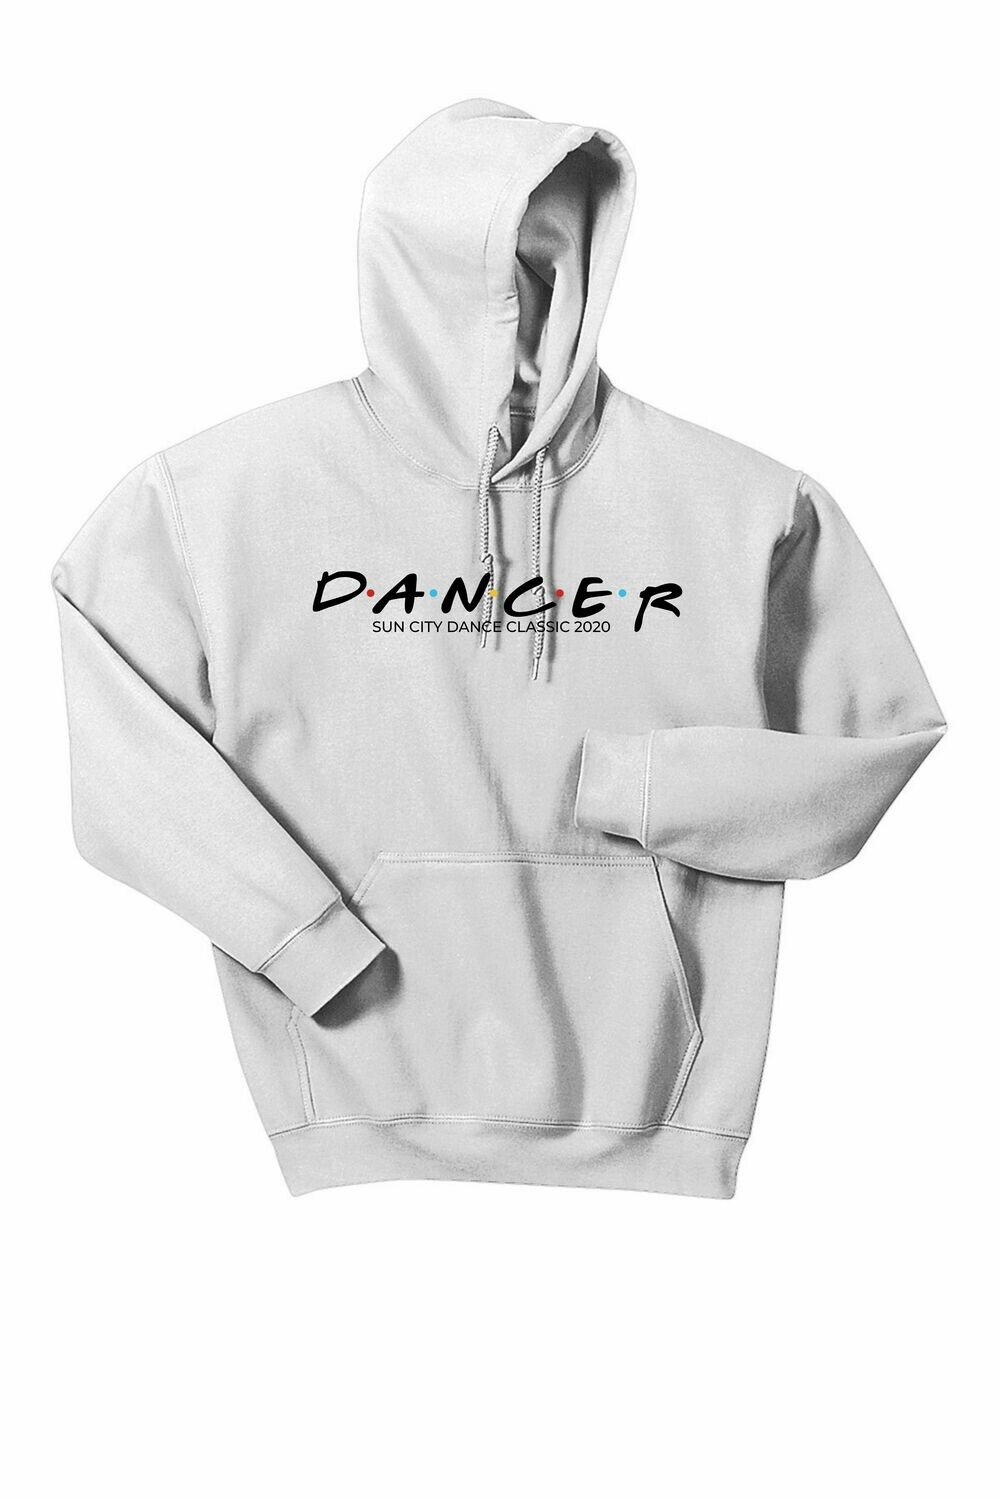 I'll Be There For You Dancer Hoodie